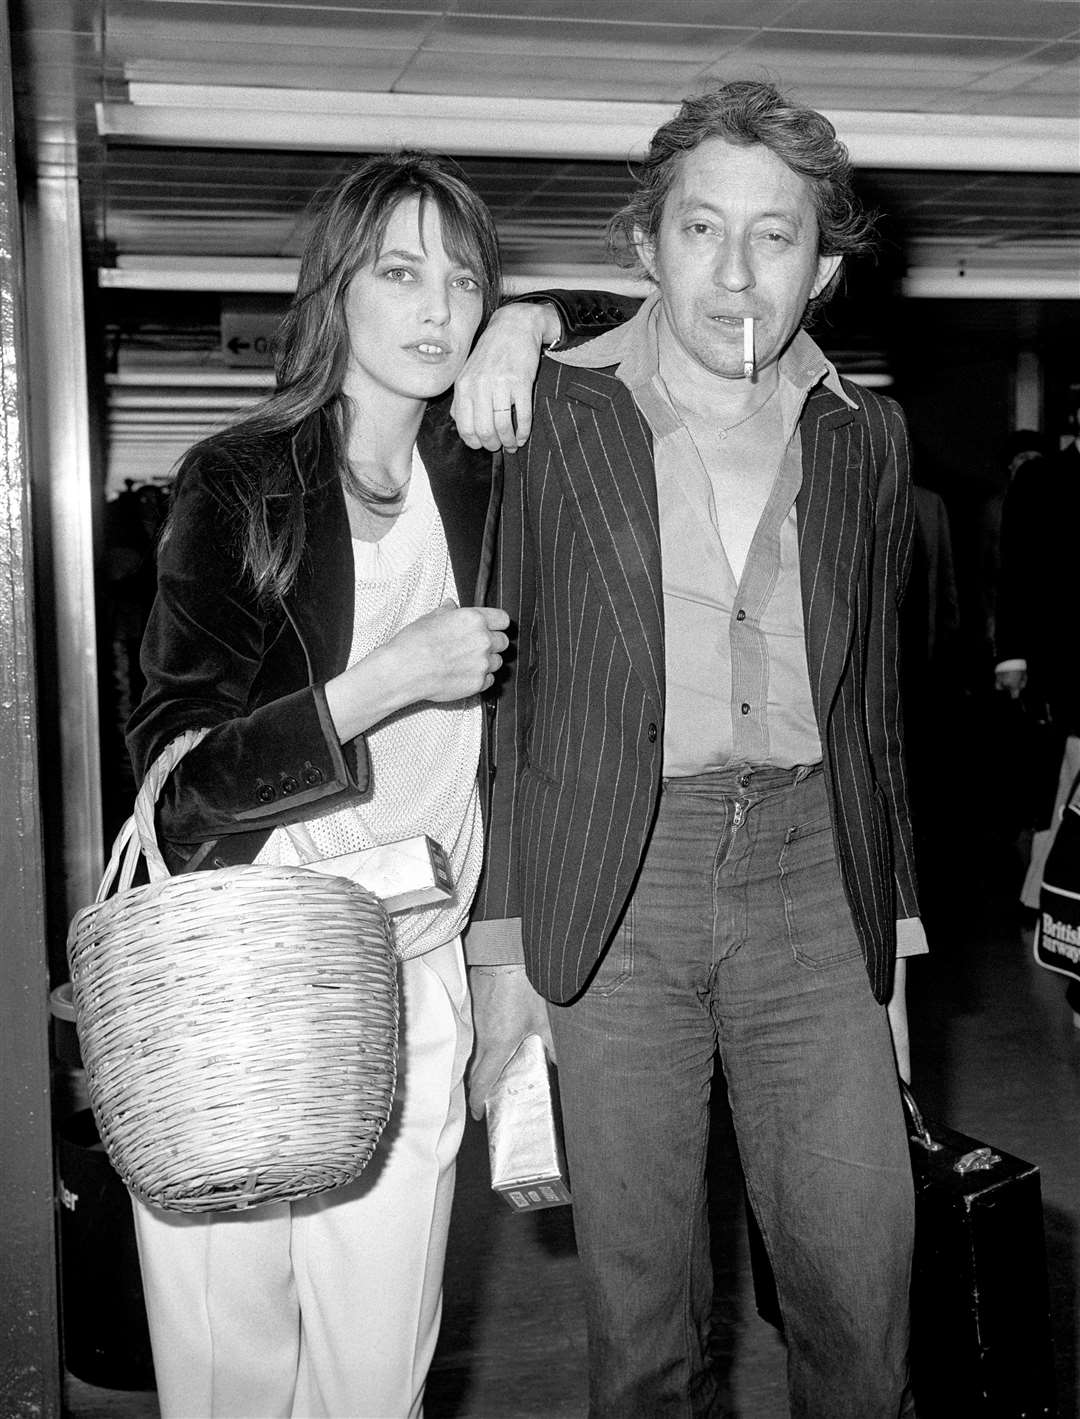 Jane Birkin with Serge Gainsbourg at London’s Heathrow Airport in 1977(PA)